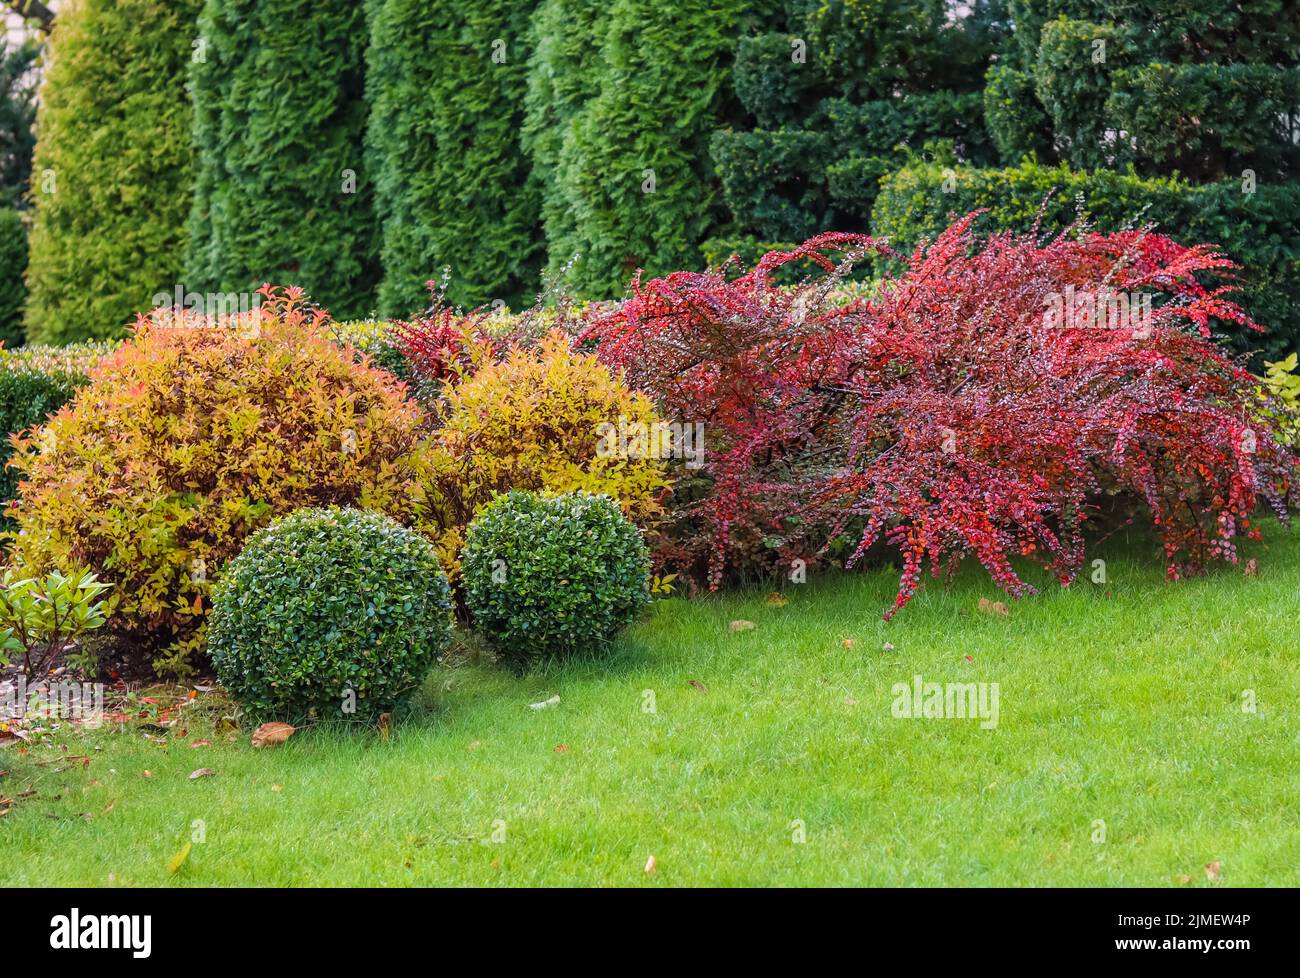 Landscaping of a garden with a green lawn, colorful decorative shrubs and shaped yew and boxwood, Buxus, in autumn Stock Photo